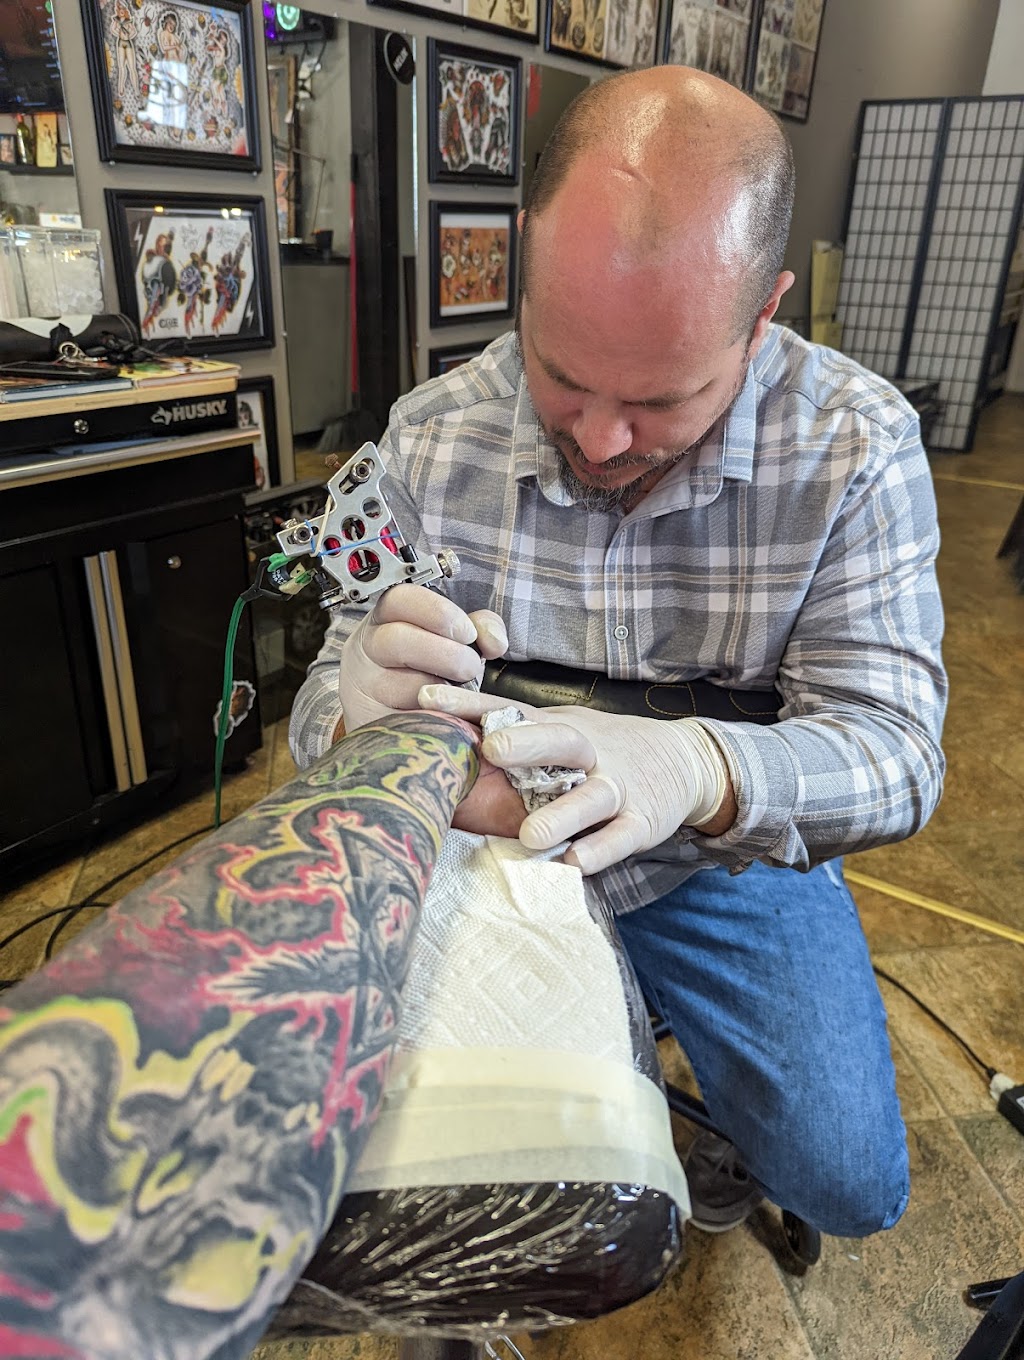 Flying Ferret Tattoo & Piercing | 675 Old State Rd, Oley, PA 19547 | Phone: (484) 491-1233